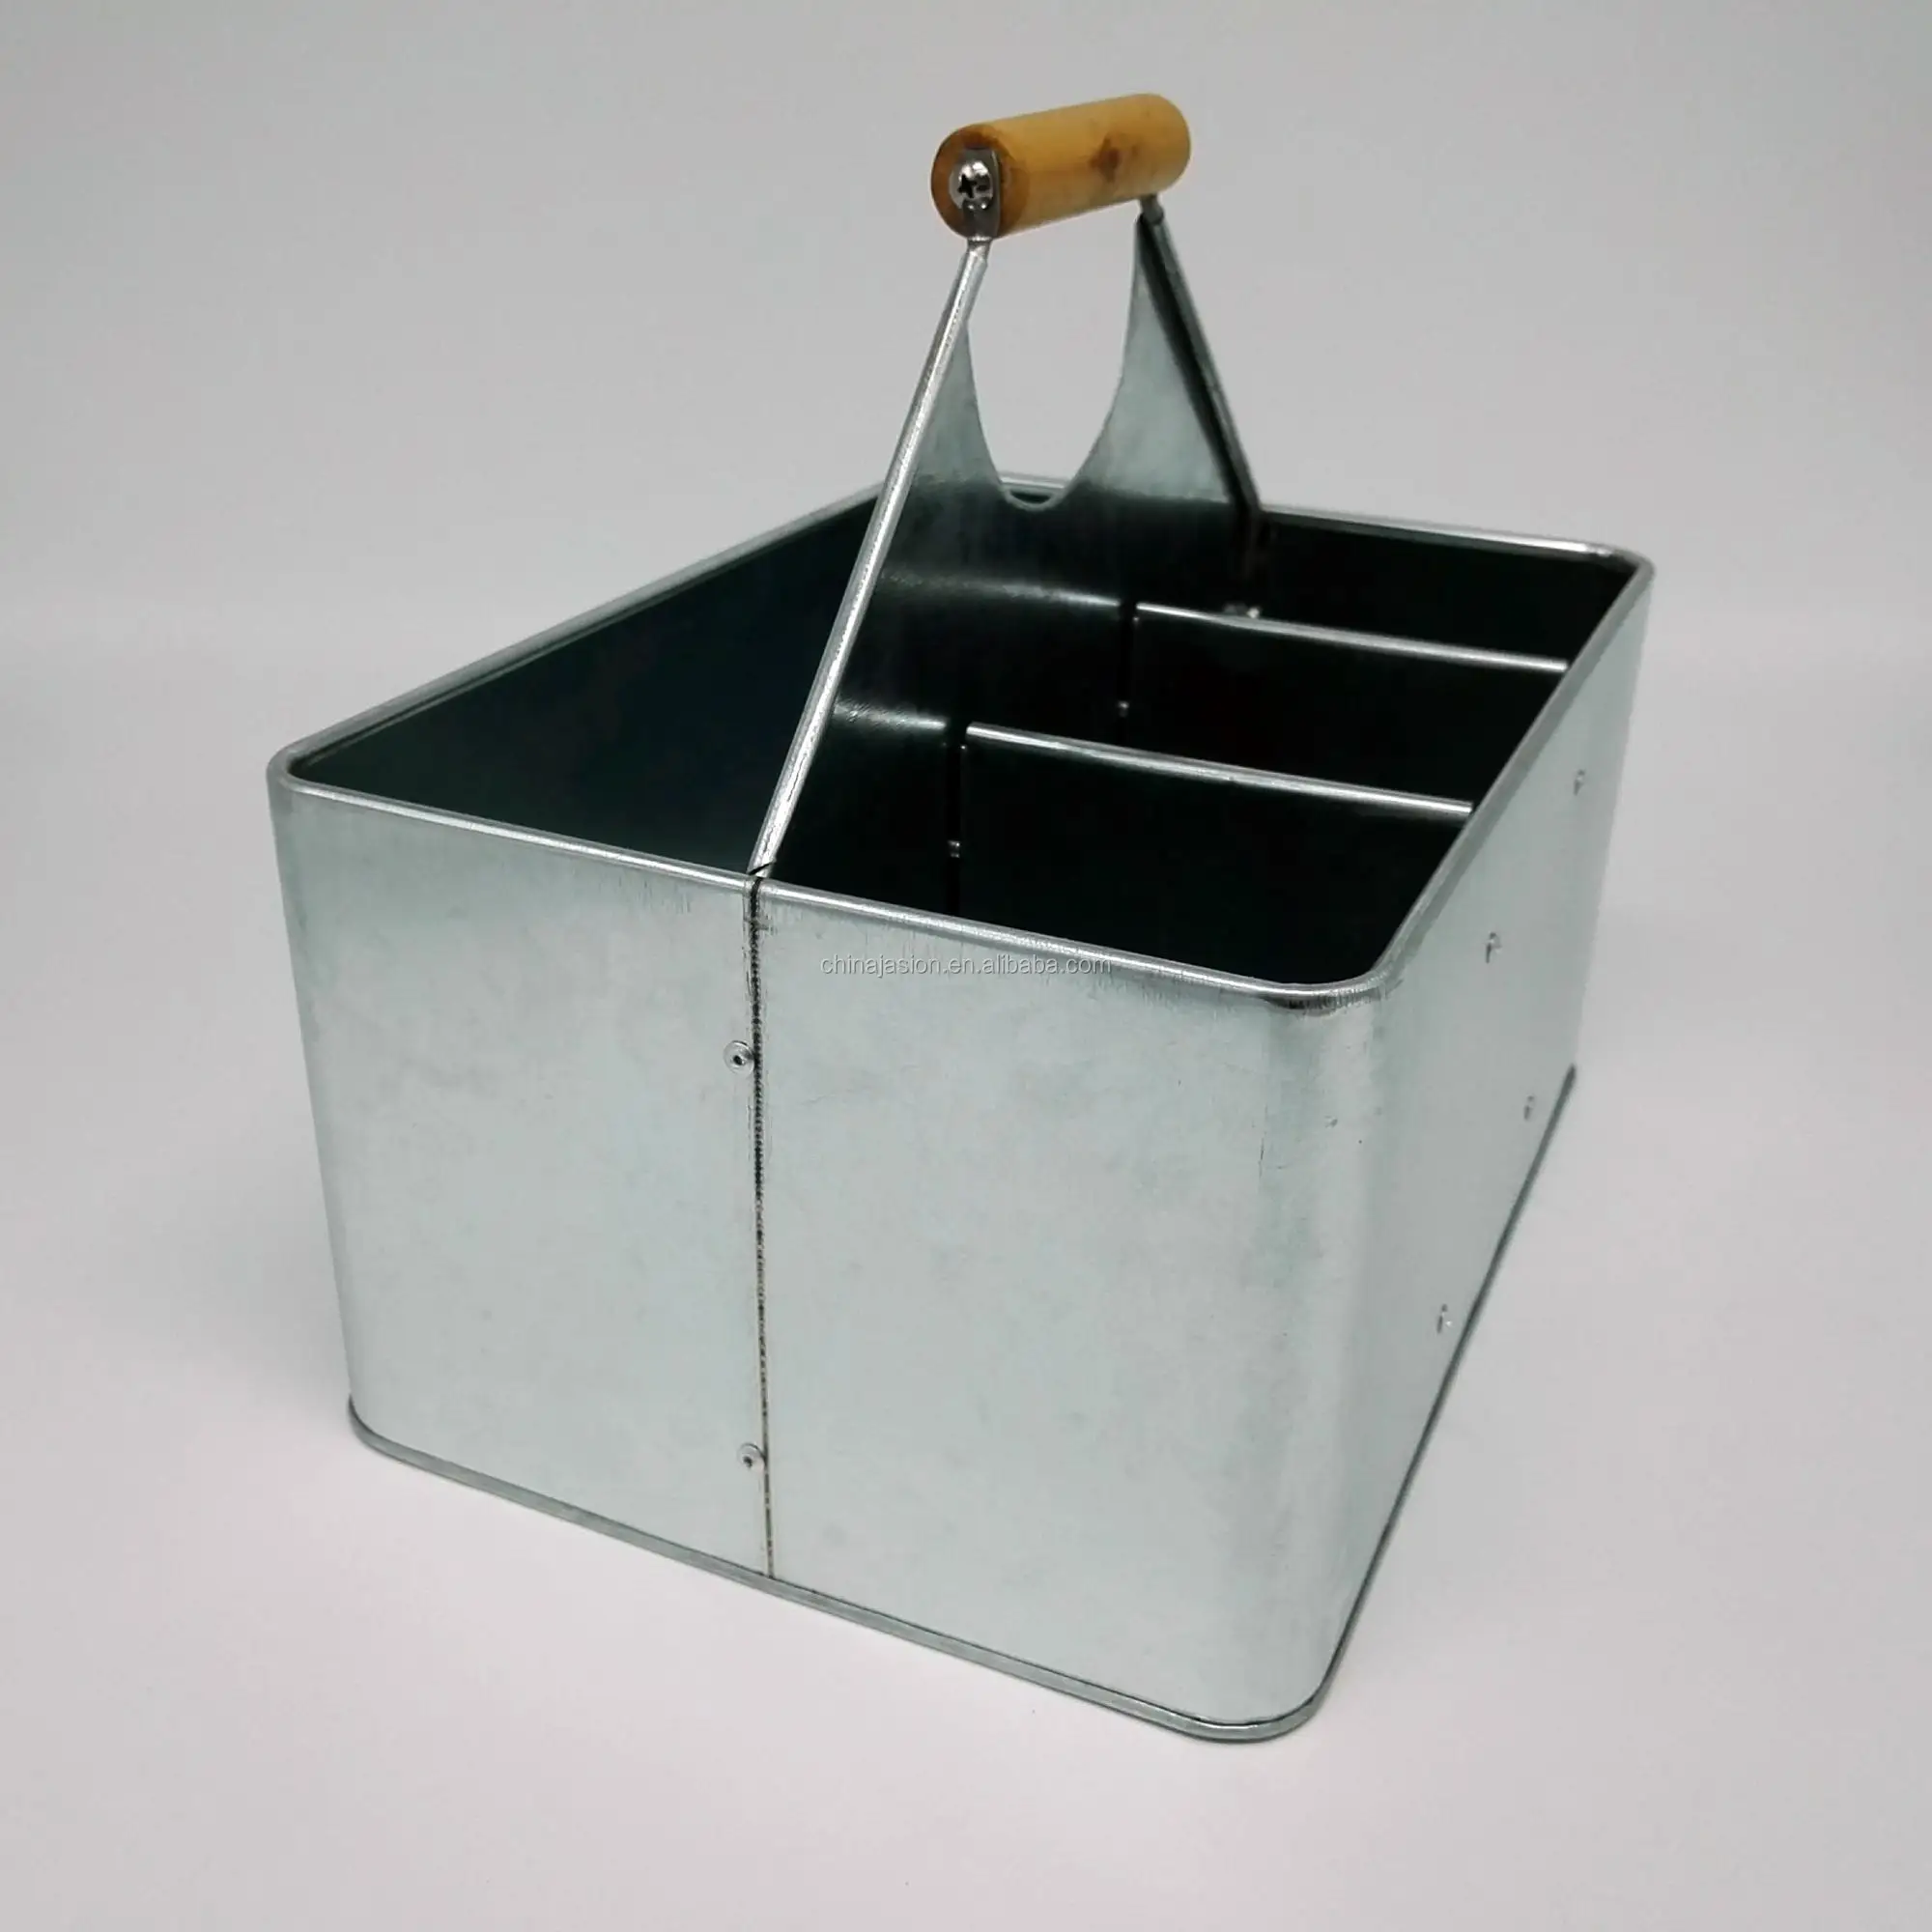 Galvanized steel Tidy organiser compartment Carry-all Tote Tray Tool Storage Beer Caddy